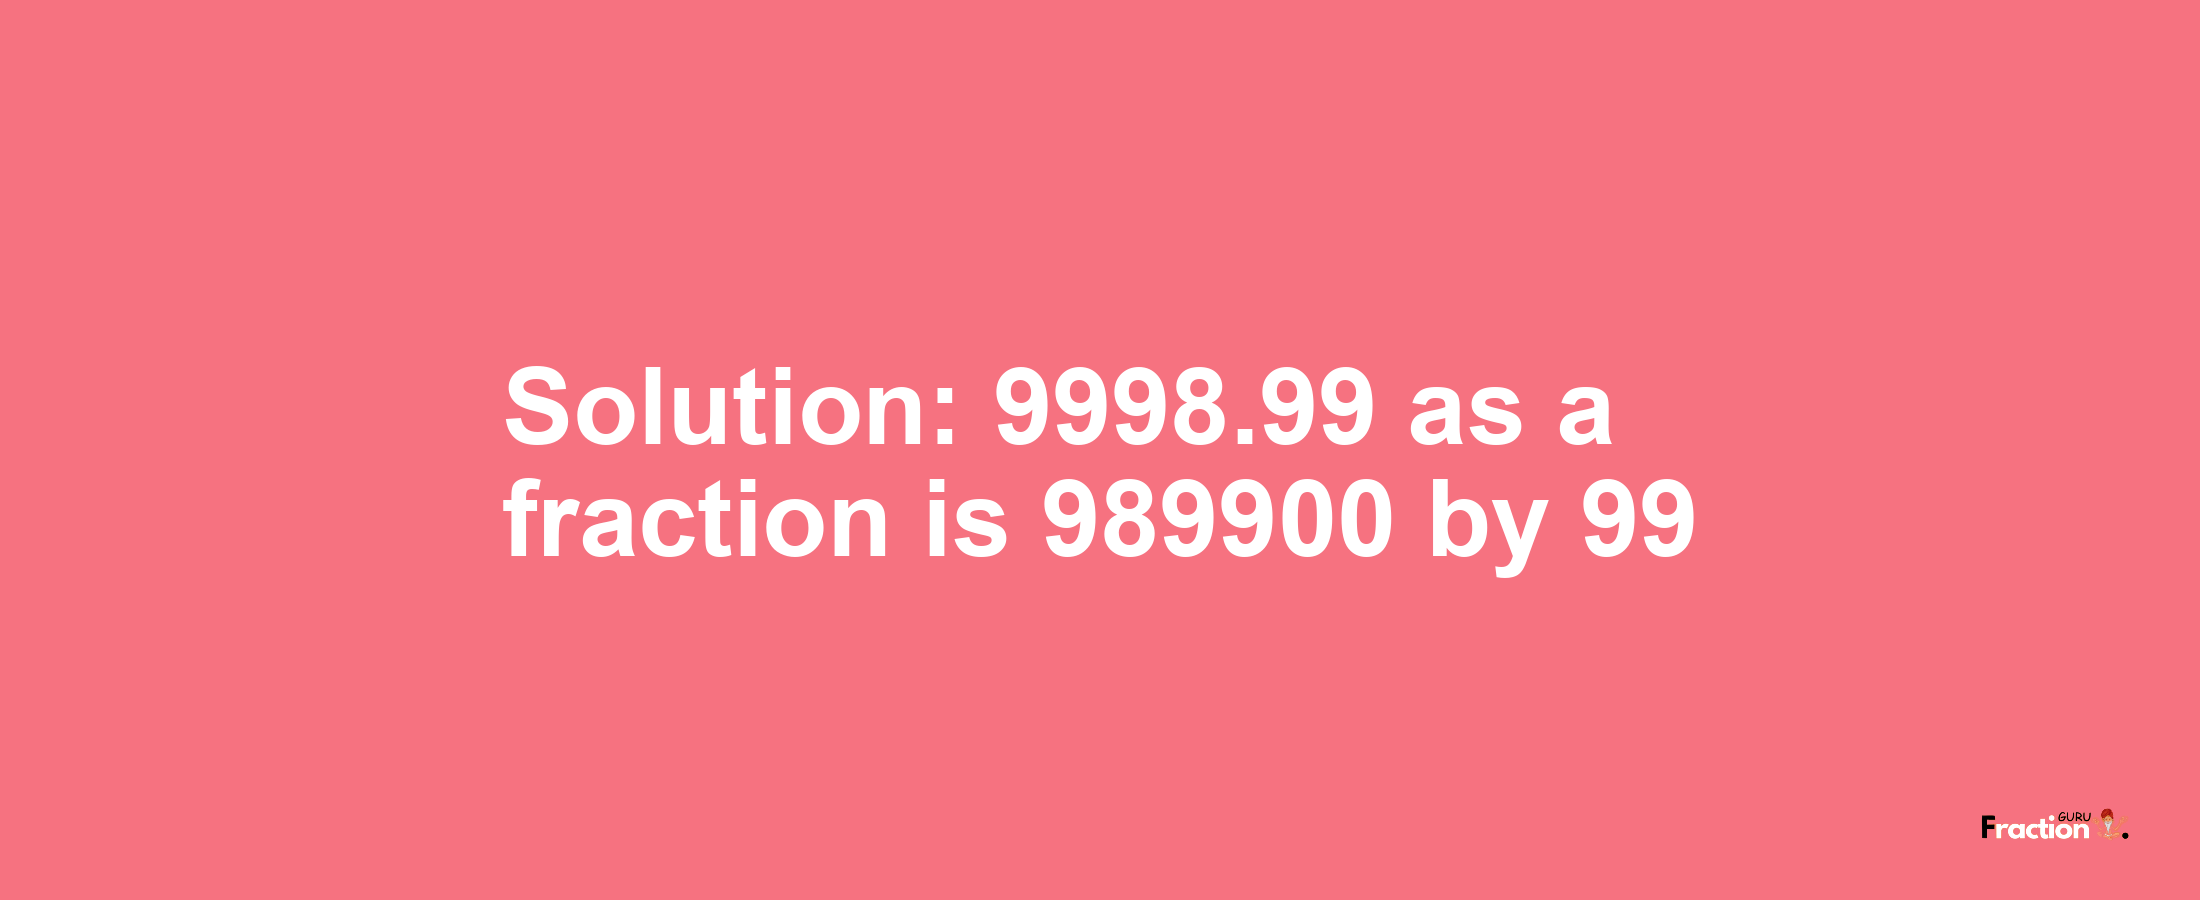 Solution:9998.99 as a fraction is 989900/99